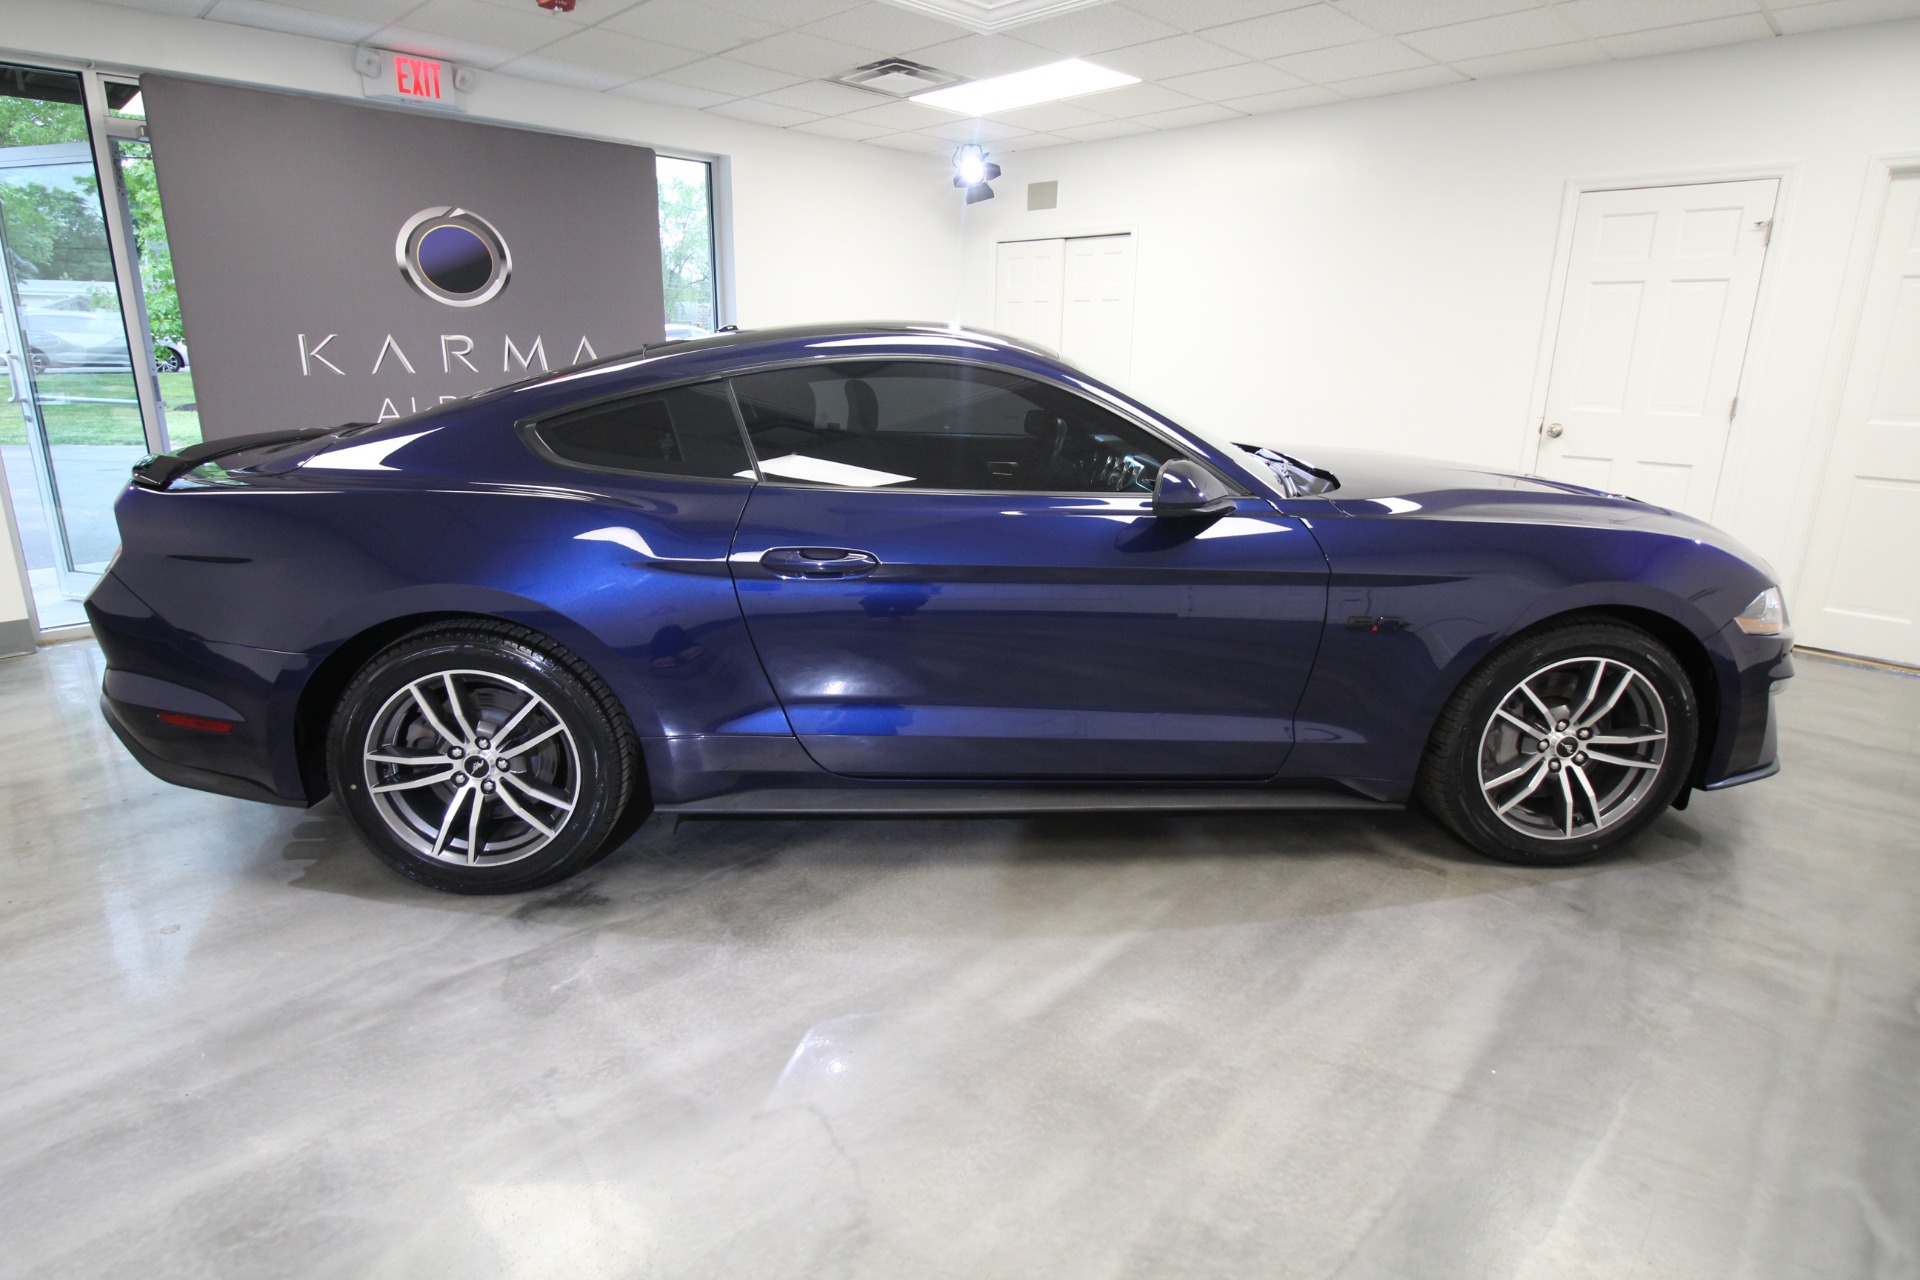 Used 2018 Kona Blue Metallic Ford Mustang GT Coupe Standard Transmission | Albany, NY